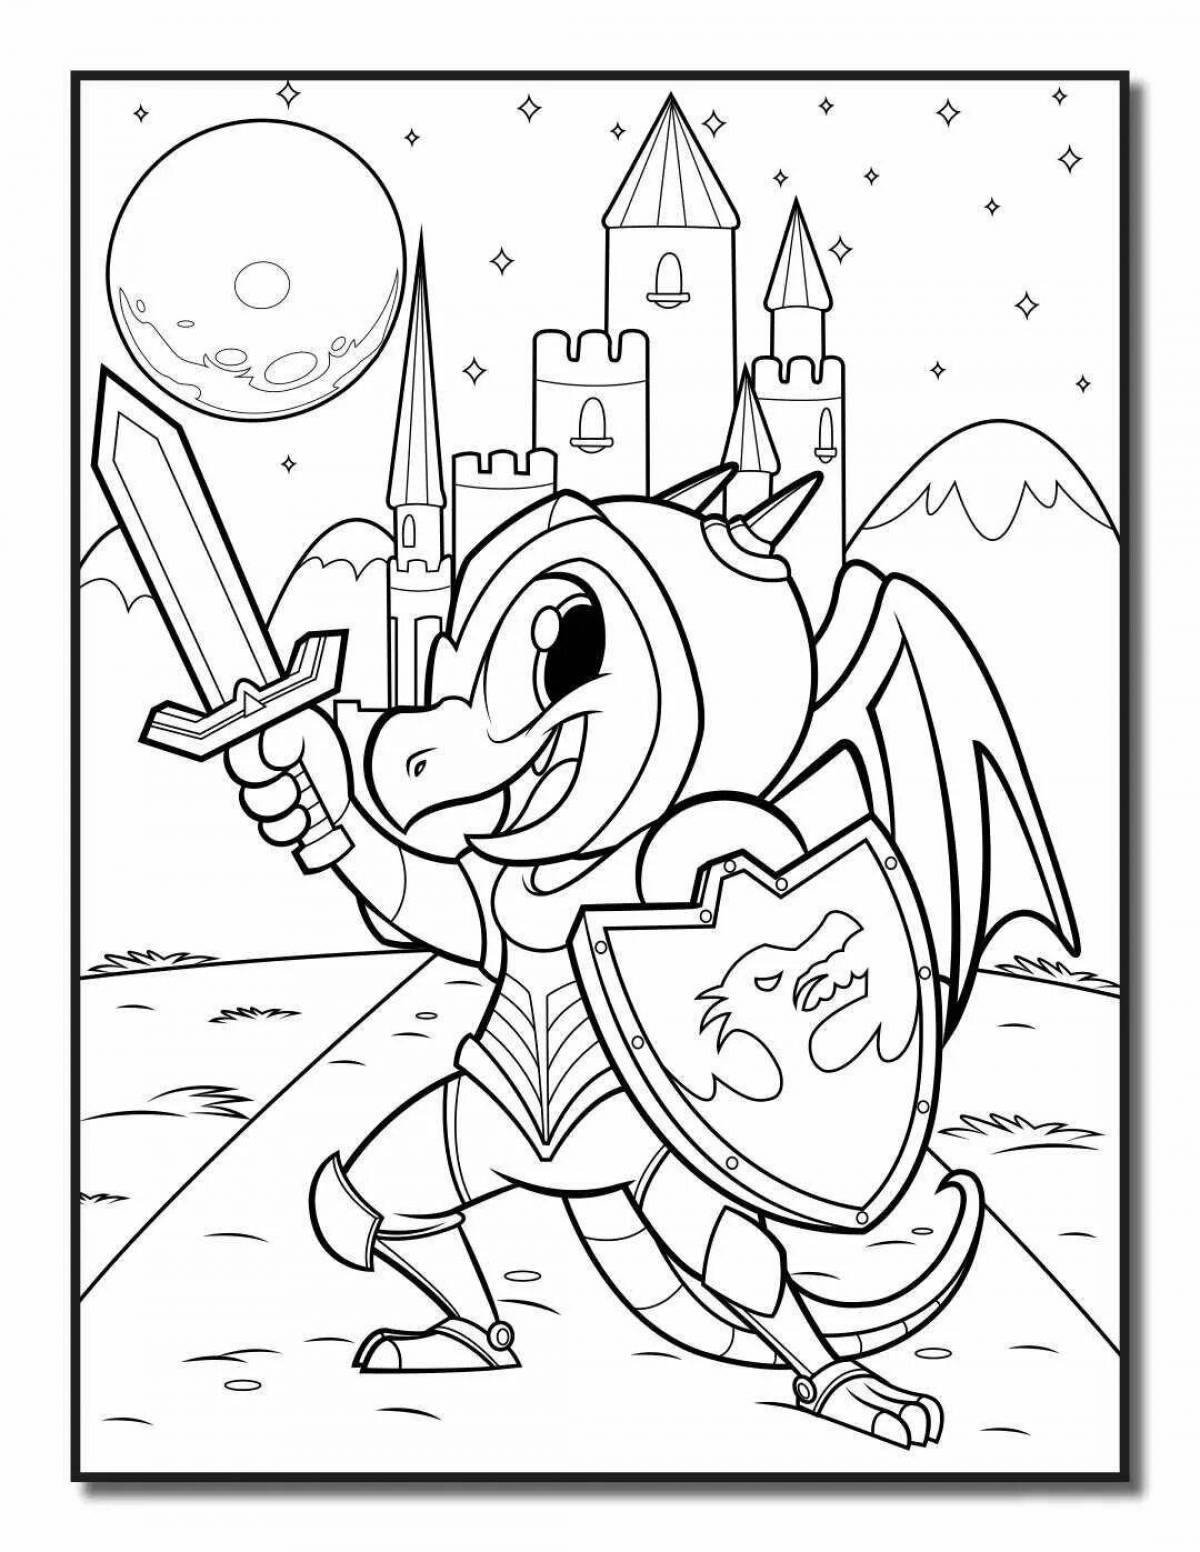 Ornate knight and dragon coloring book